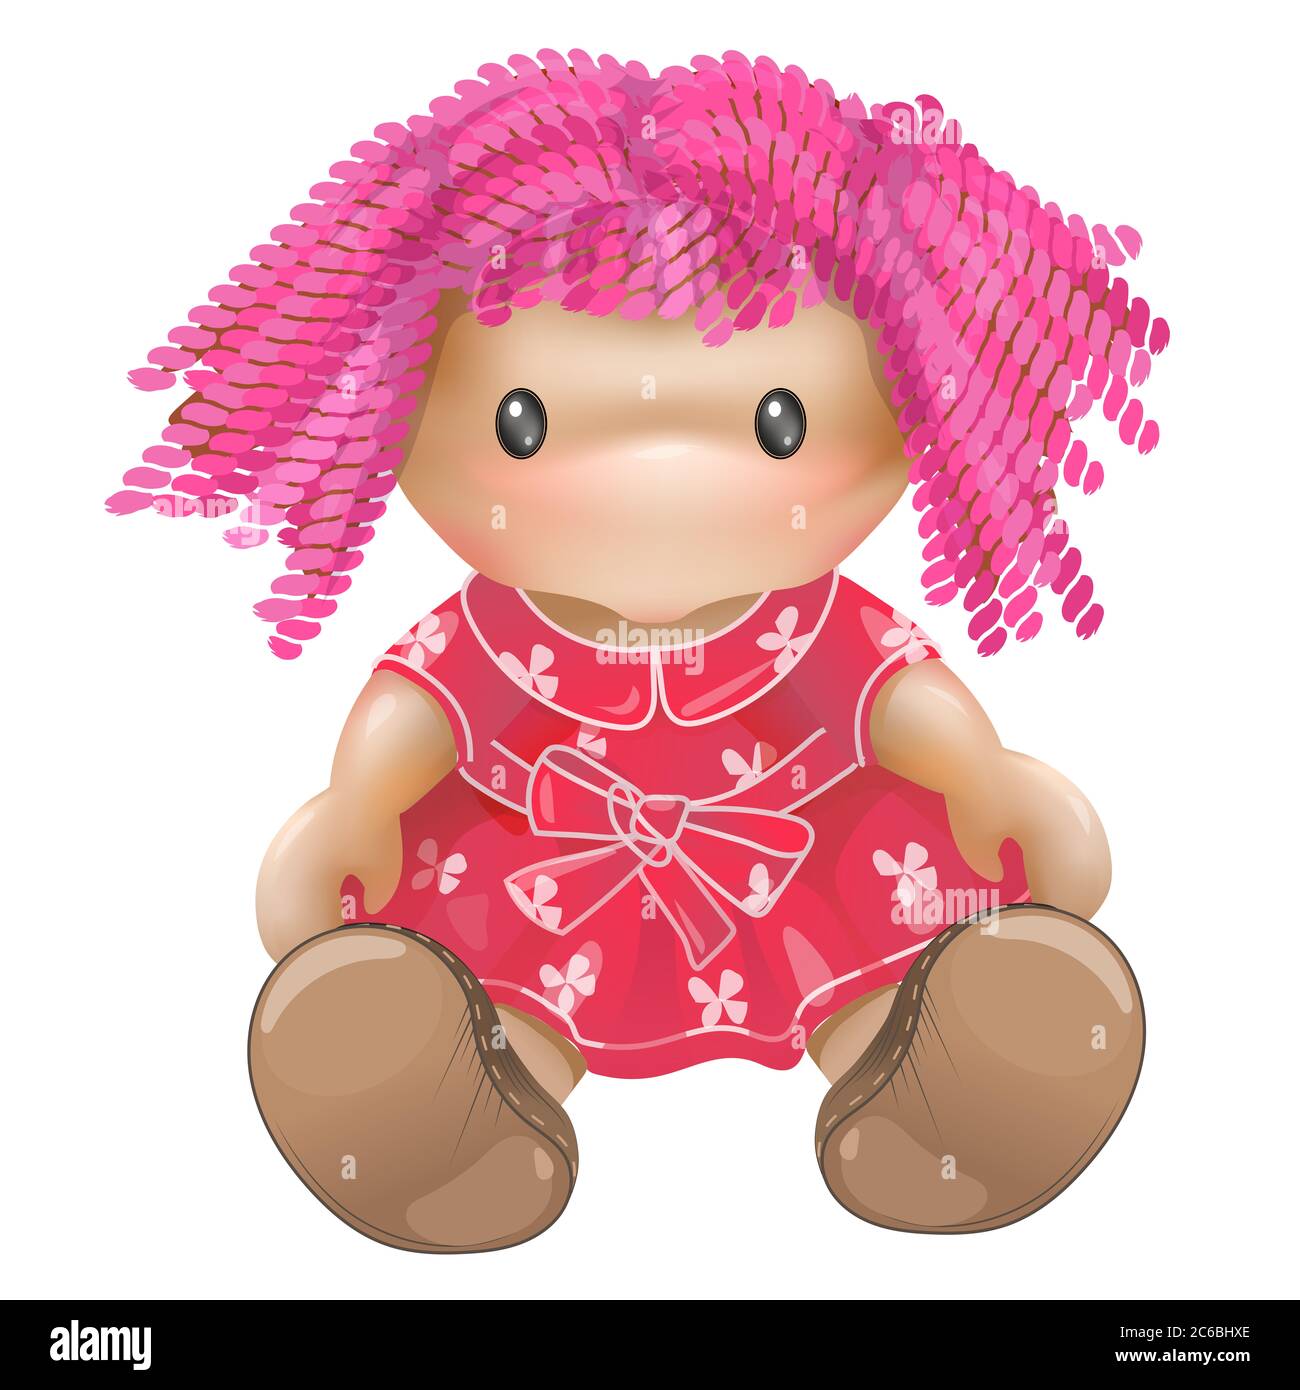 Doll. Rag toy.Threads, pink hair, pink dress. Stock Photo